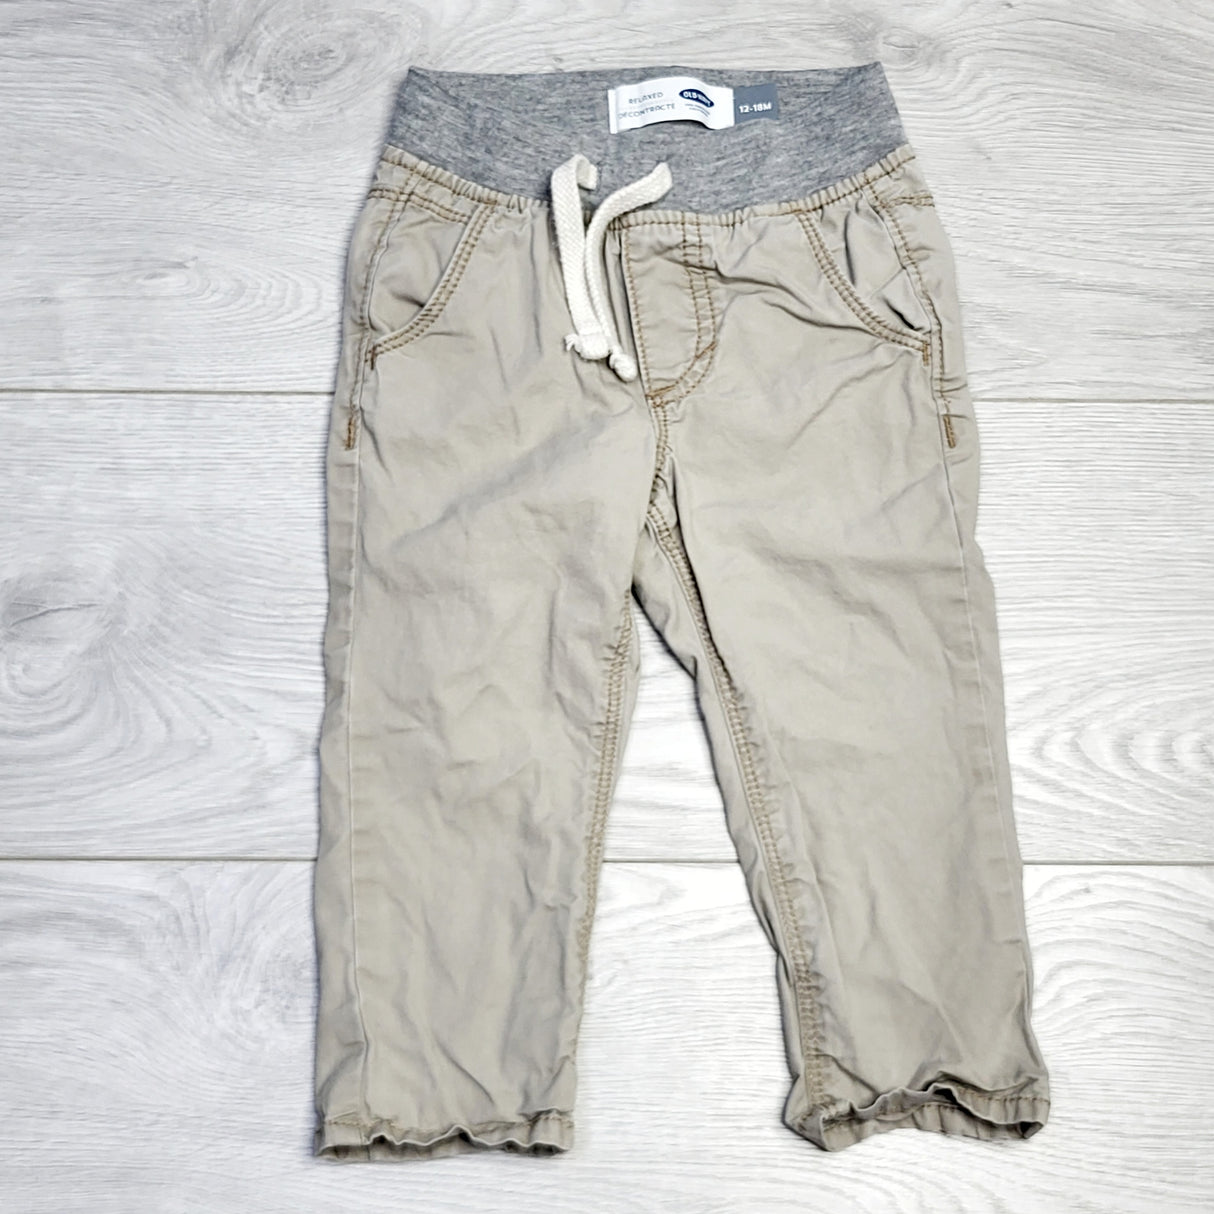 RZA2 - Old Navy relaxed fit pull on pants. Size 12-18 months